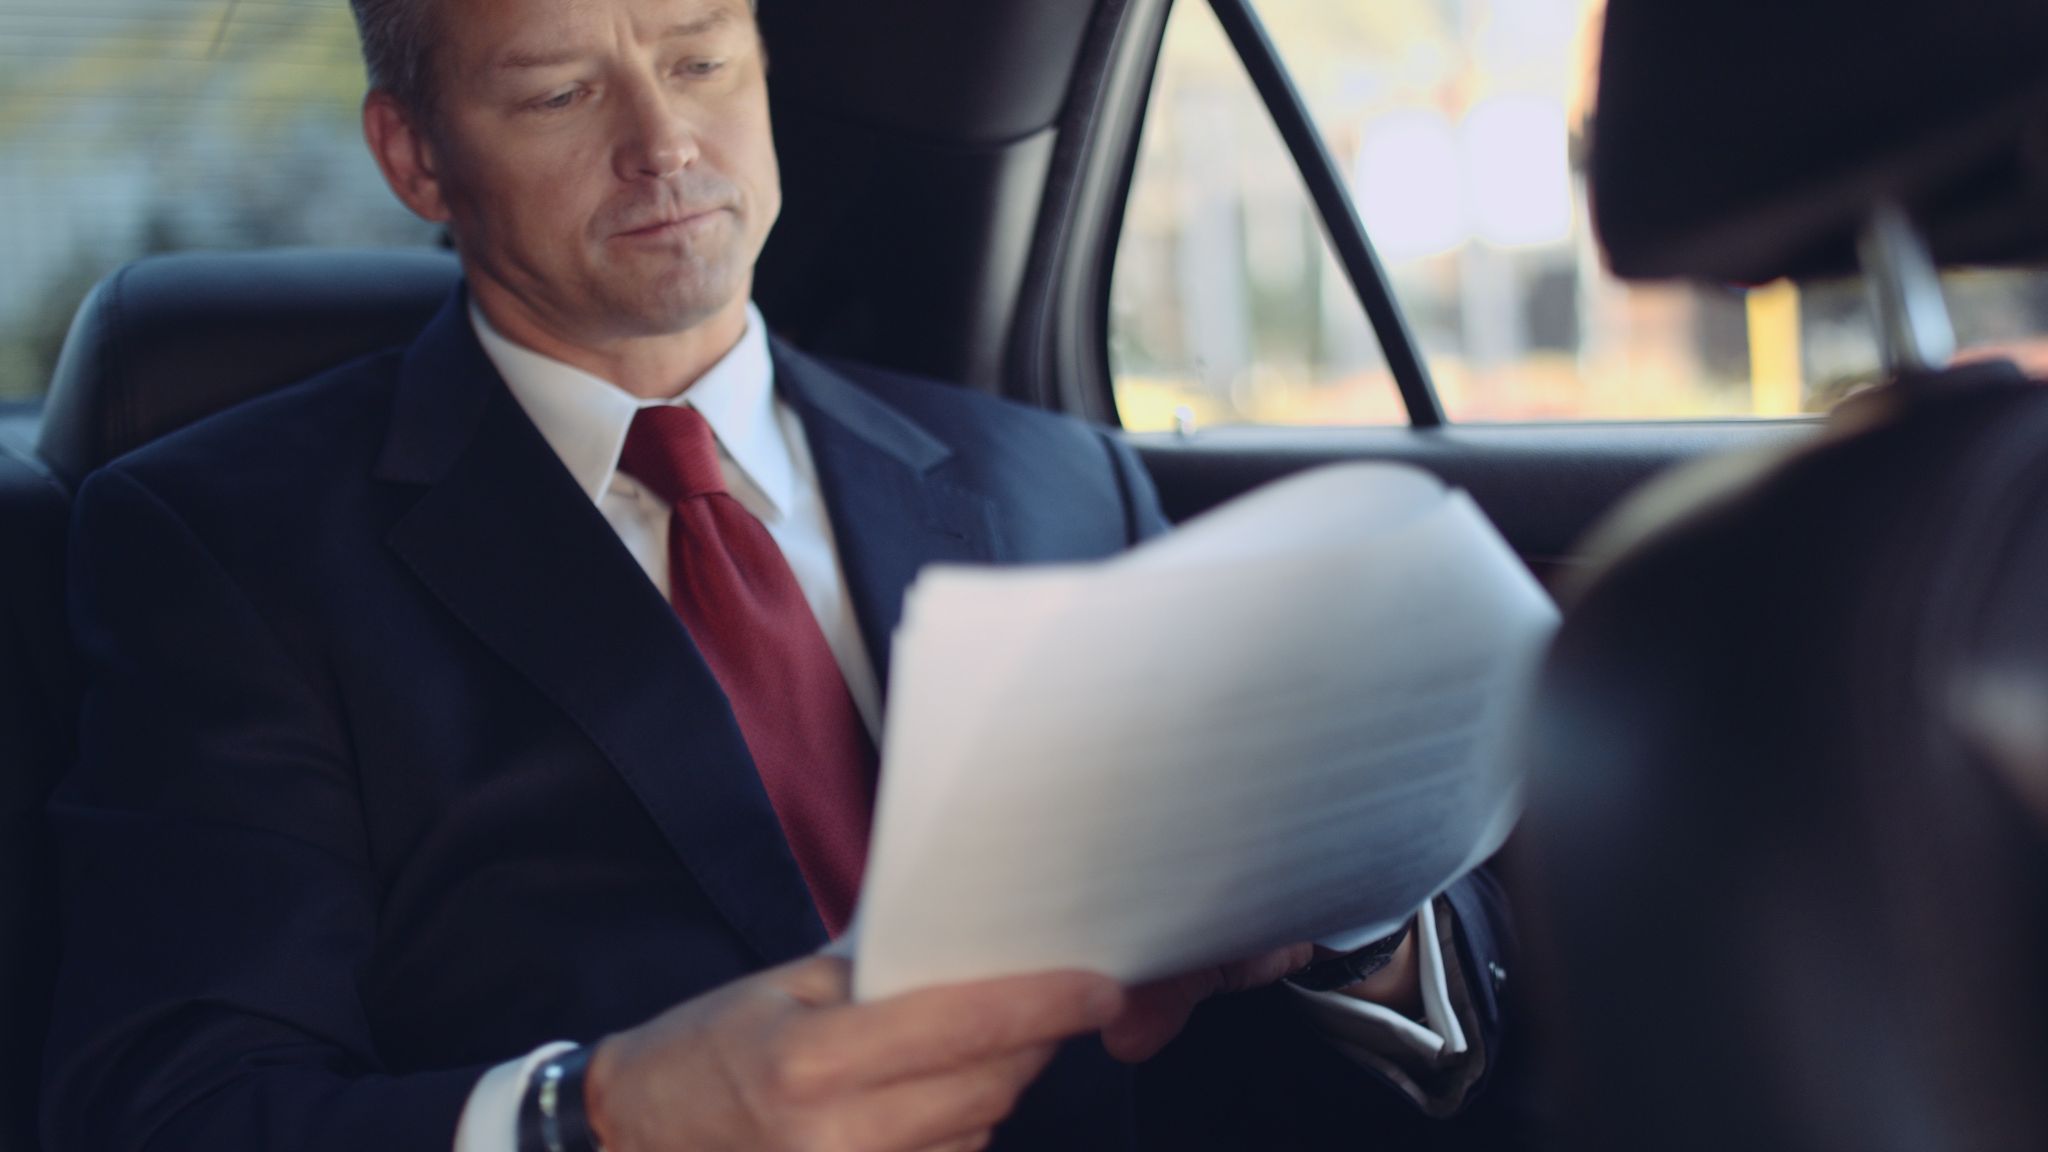 Closeup of man in a business suit with red tie sitting in the backseat of a car looking over papers